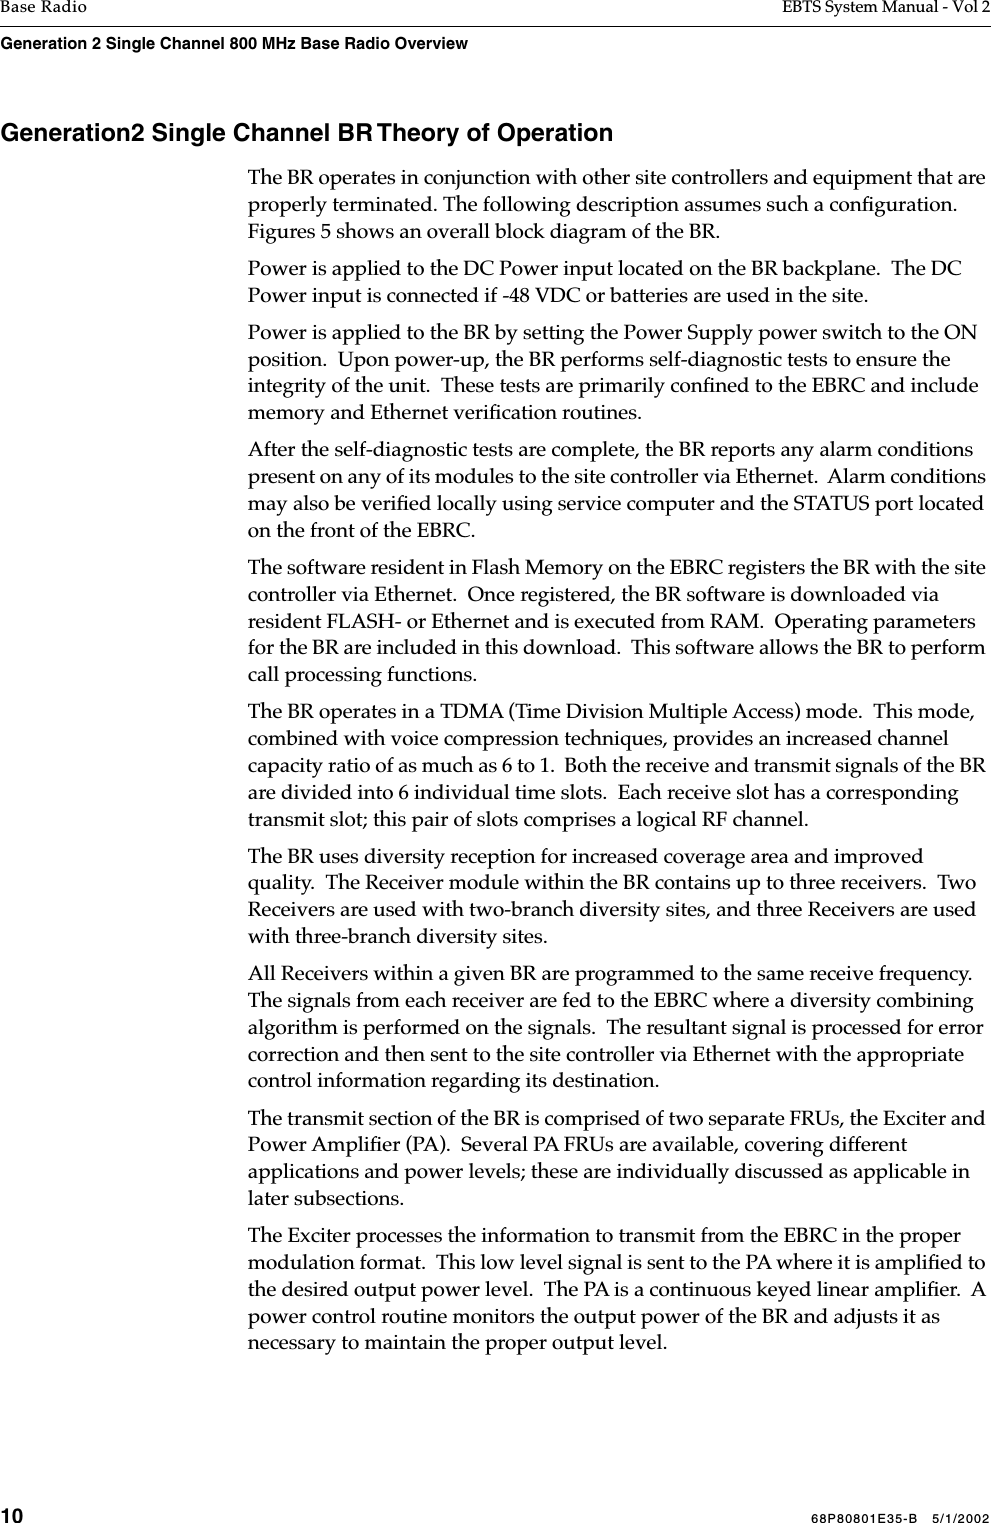 10 68P80801E35-B   5/1/2002Base Radio EBTS System Manual - Vol 2Generation 2 Single Channel 800 MHz Base Radio Overview Generation2 Single Channel BR Theory of OperationThe BR operates in conjunction with other site controllers and equipment that are properly terminated. The following description assumes such a conﬁguration. Figures 5 shows an overall block diagram of the BR.Power is applied to the DC Power input located on the BR backplane.  The DC Power input is connected if -48 VDC or batteries are used in the site. Power is applied to the BR by setting the Power Supply power switch to the ON position.  Upon power-up, the BR performs self-diagnostic tests to ensure the integrity of the unit.  These tests are primarily conﬁned to the EBRC and include memory and Ethernet veriﬁcation routines. After the self-diagnostic tests are complete, the BR reports any alarm conditions present on any of its modules to the site controller via Ethernet.  Alarm conditions may also be veriﬁed locally using service computer and the STATUS port located on the front of the EBRC.The software resident in Flash Memory on the EBRC registers the BR with the site controller via Ethernet.  Once registered, the BR software is downloaded via resident FLASH- or Ethernet and is executed from RAM.  Operating parameters for the BR are included in this download.  This software allows the BR to perform call processing functions. The BR operates in a TDMA (Time Division Multiple Access) mode.  This mode, combined with voice compression techniques, provides an increased channel capacity ratio of as much as 6 to 1.  Both the receive and transmit signals of the BR are divided into 6 individual time slots.  Each receive slot has a corresponding transmit slot; this pair of slots comprises a logical RF channel. The BR uses diversity reception for increased coverage area and improved quality.  The Receiver module within the BR contains up to three receivers.  Two Receivers are used with two-branch diversity sites, and three Receivers are used with three-branch diversity sites. All Receivers within a given BR are programmed to the same receive frequency.  The signals from each receiver are fed to the EBRC where a diversity combining algorithm is performed on the signals.  The resultant signal is processed for error correction and then sent to the site controller via Ethernet with the appropriate control information regarding its destination.The transmit section of the BR is comprised of two separate FRUs, the Exciter and Power Ampliﬁer (PA).  Several PA FRUs are available, covering different applications and power levels; these are individually discussed as applicable in later subsections.The Exciter processes the information to transmit from the EBRC in the proper modulation format.  This low level signal is sent to the PA where it is ampliﬁed to the desired output power level.  The PA is a continuous keyed linear ampliﬁer.  A power control routine monitors the output power of the BR and adjusts it as necessary to maintain the proper output level.